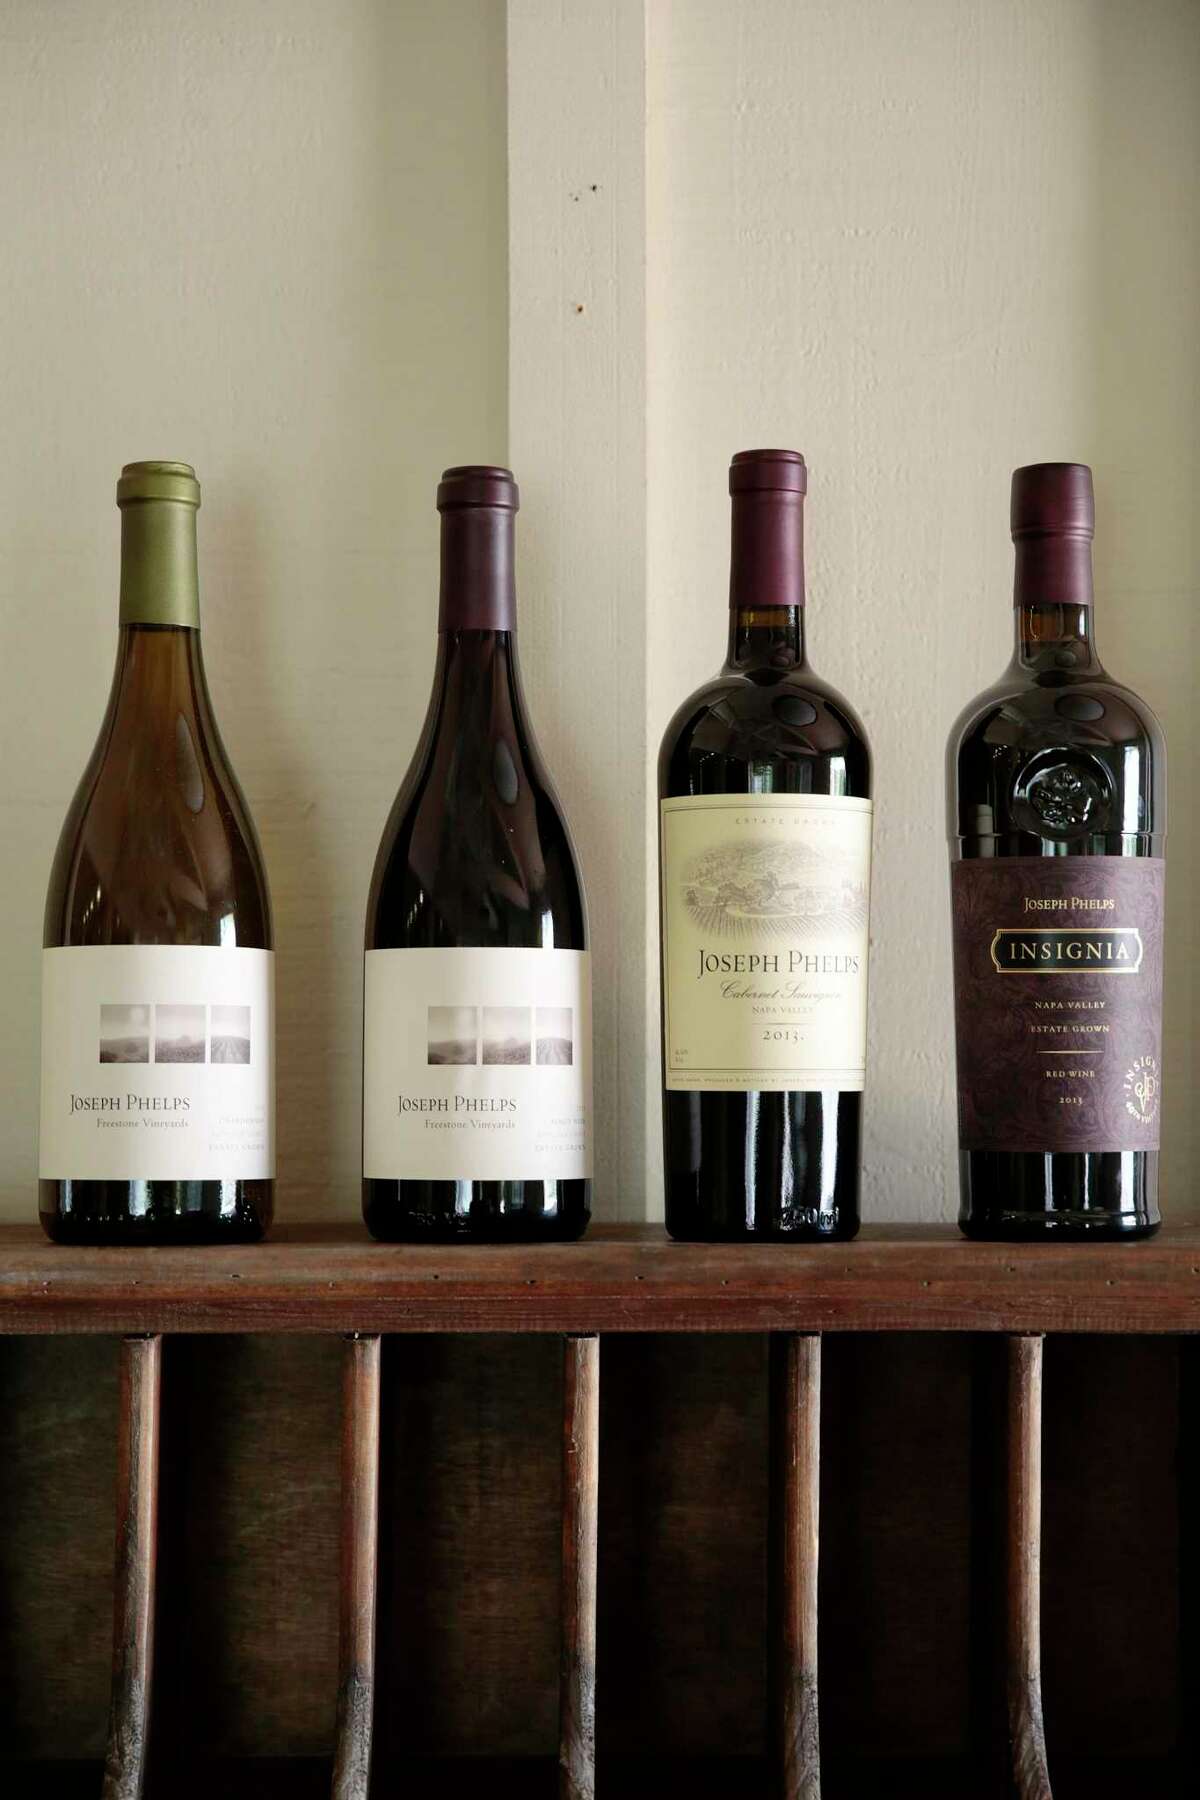 Bottles of Joseph Phelps wines from Sonoma County and Napa Valley seen at its tasting room in Freestone, which has since closed.